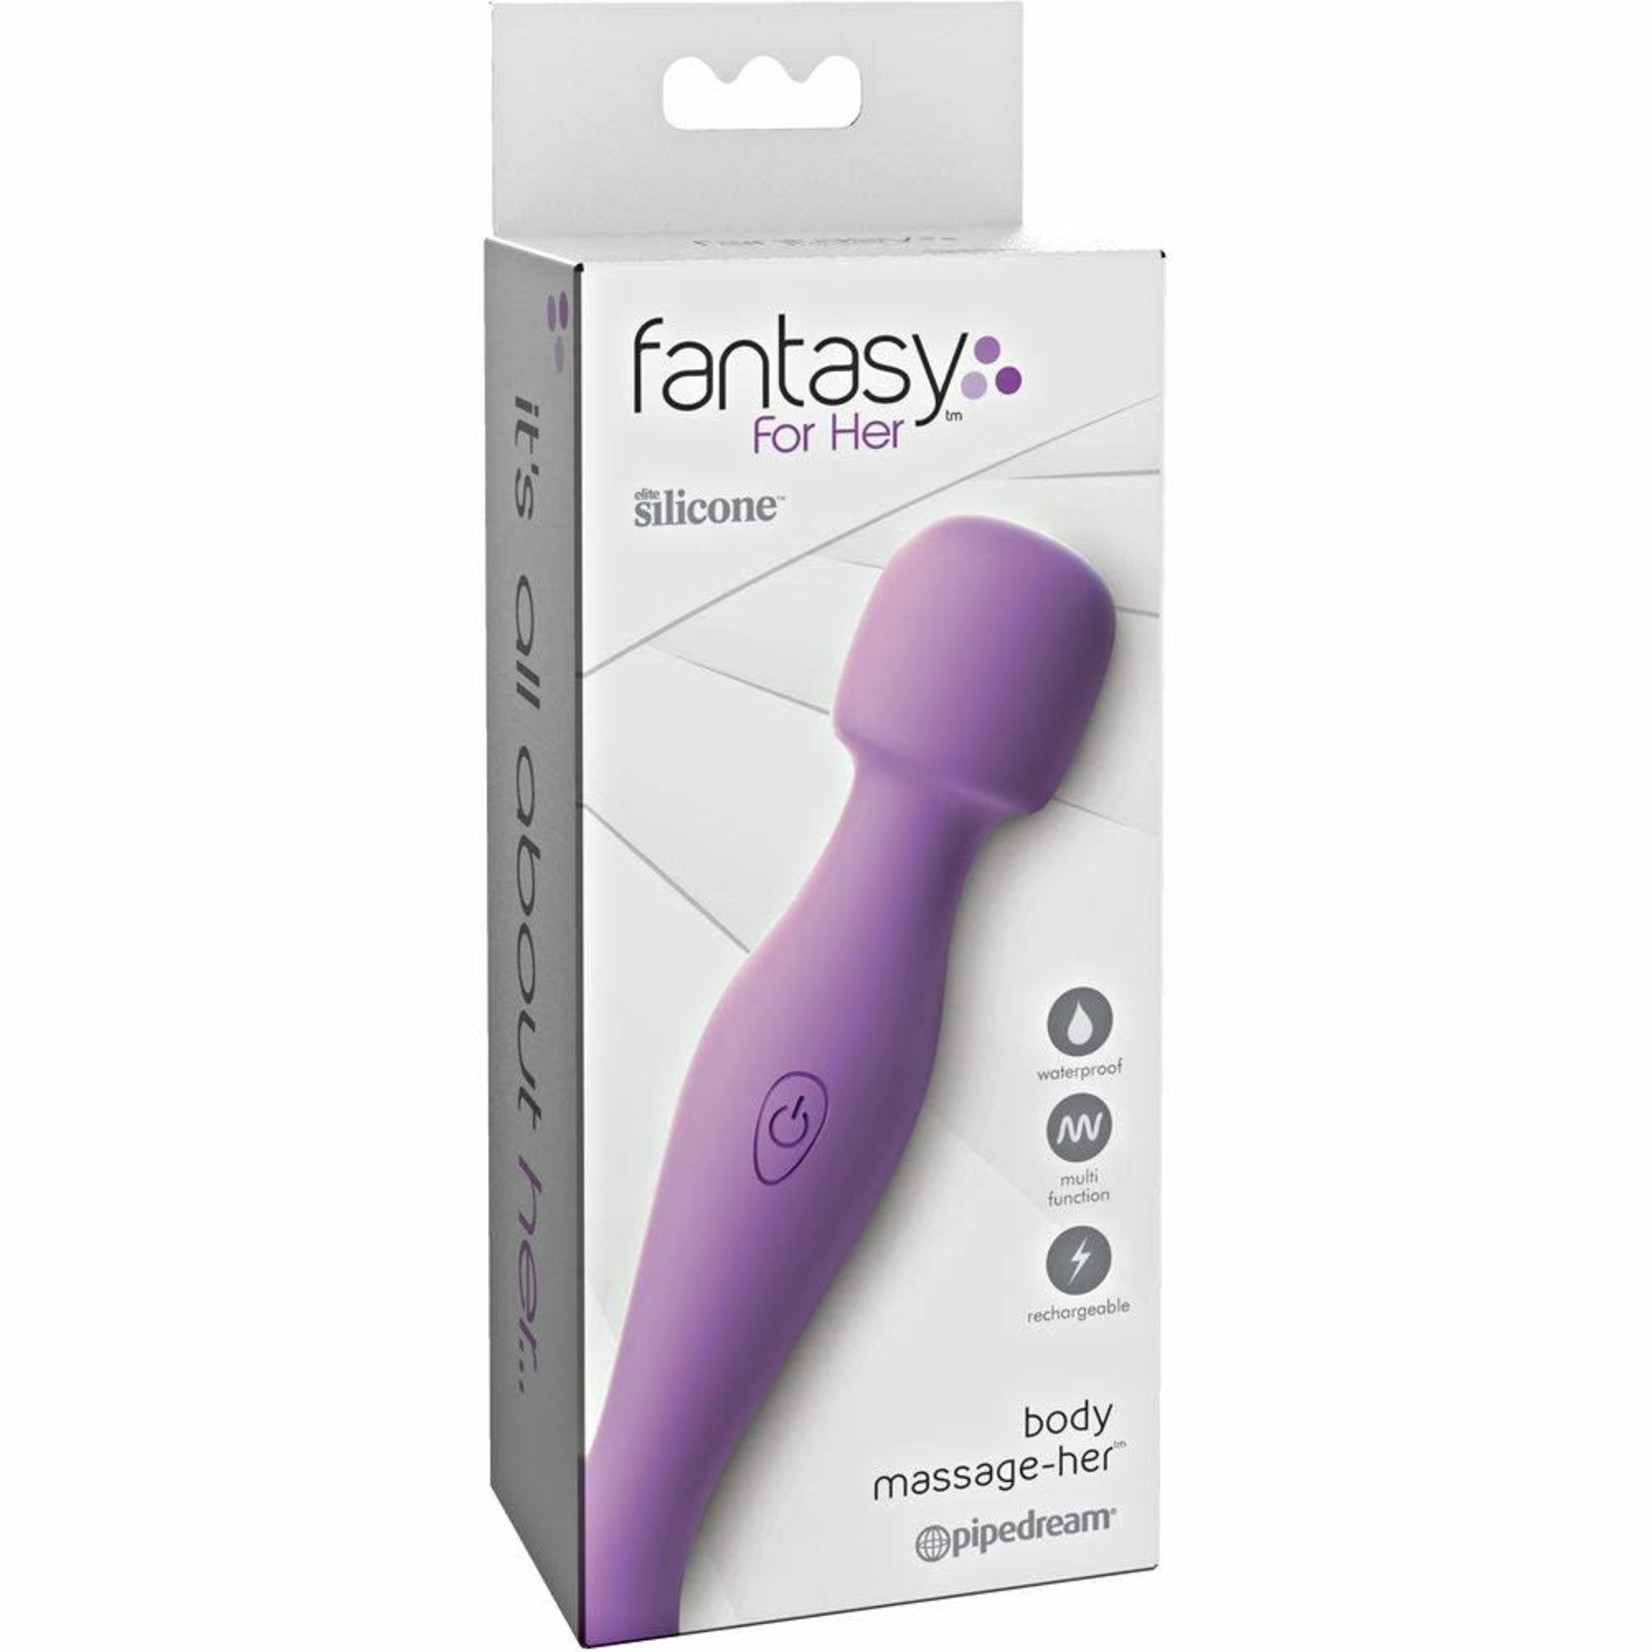 FANTASY FOR HER FANTASY FOR HER BODY MASSAGE-HER - PURPLE